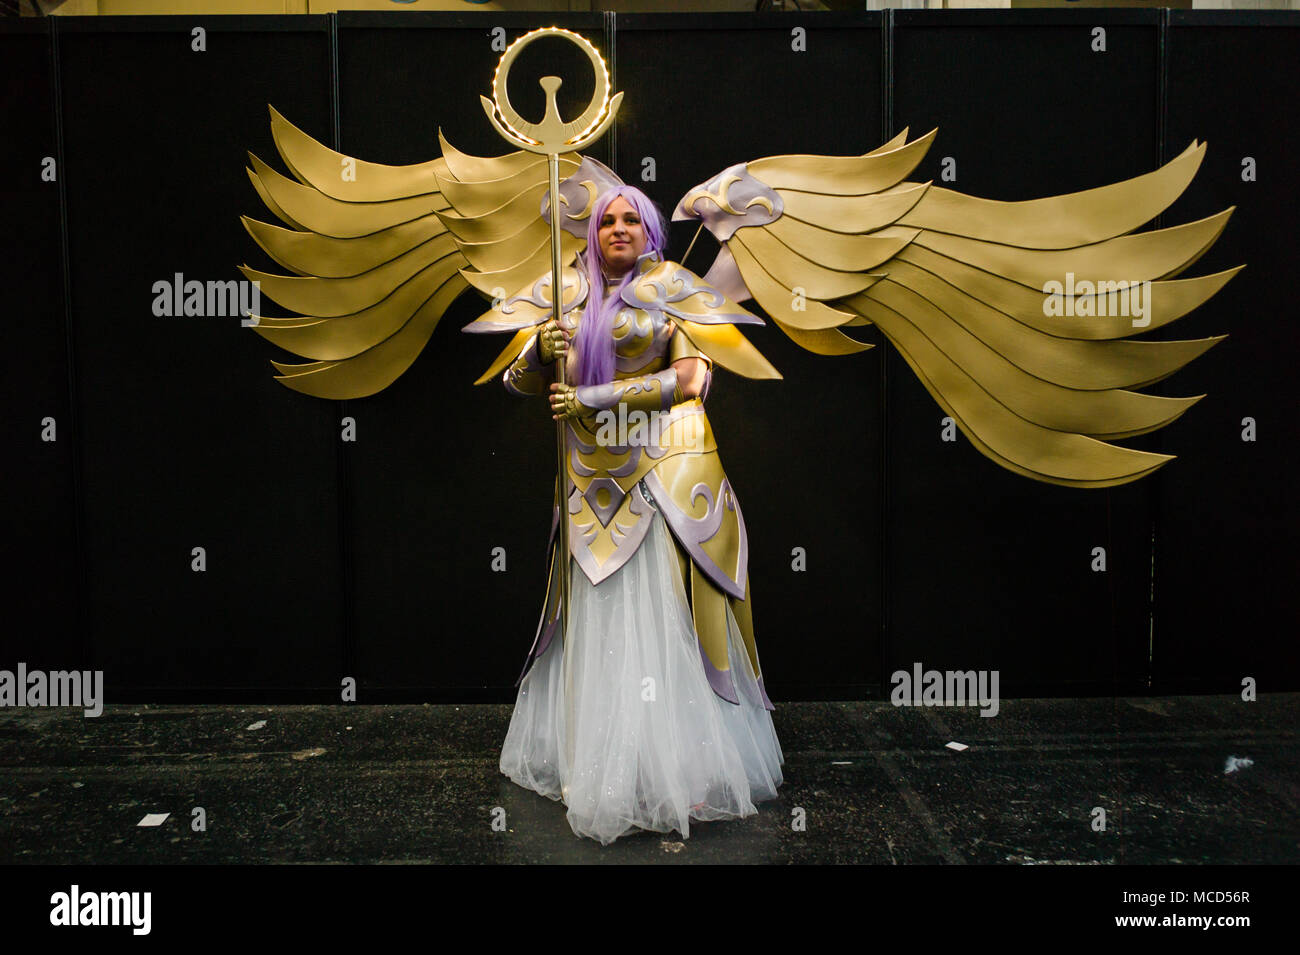 Turin, Italy, 15th April 2018 pictures of cosplayers during the 'torino comics', the event dedicated to cosplay comics and videogames Credit: Daniele Baldi Stock Photo